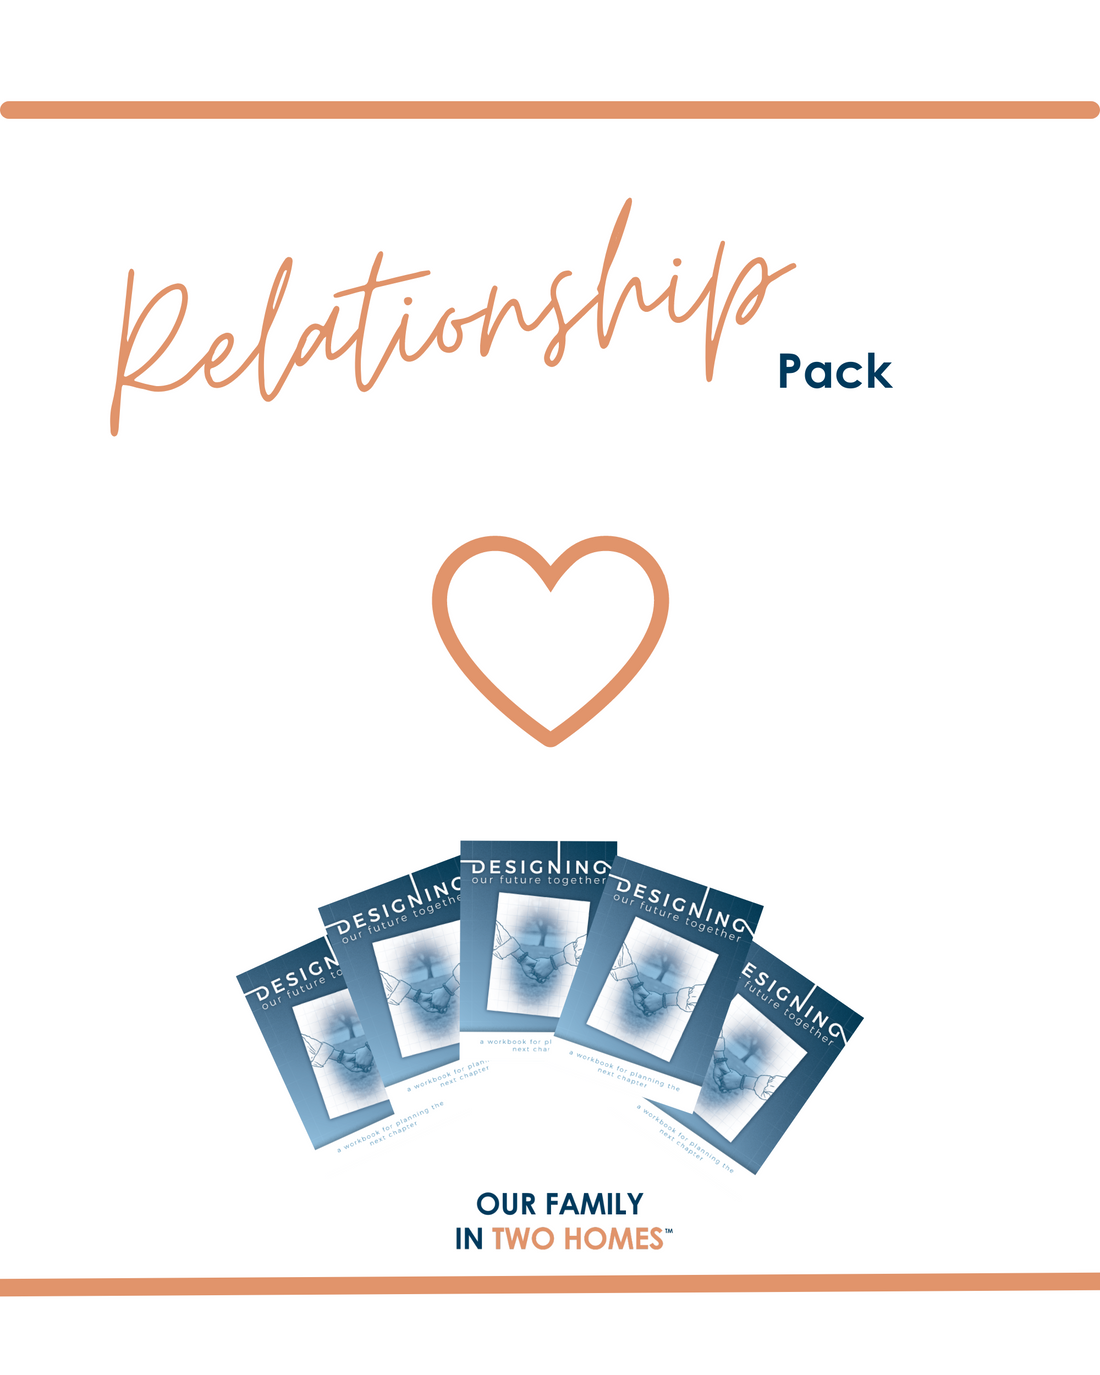 Relationship Pack